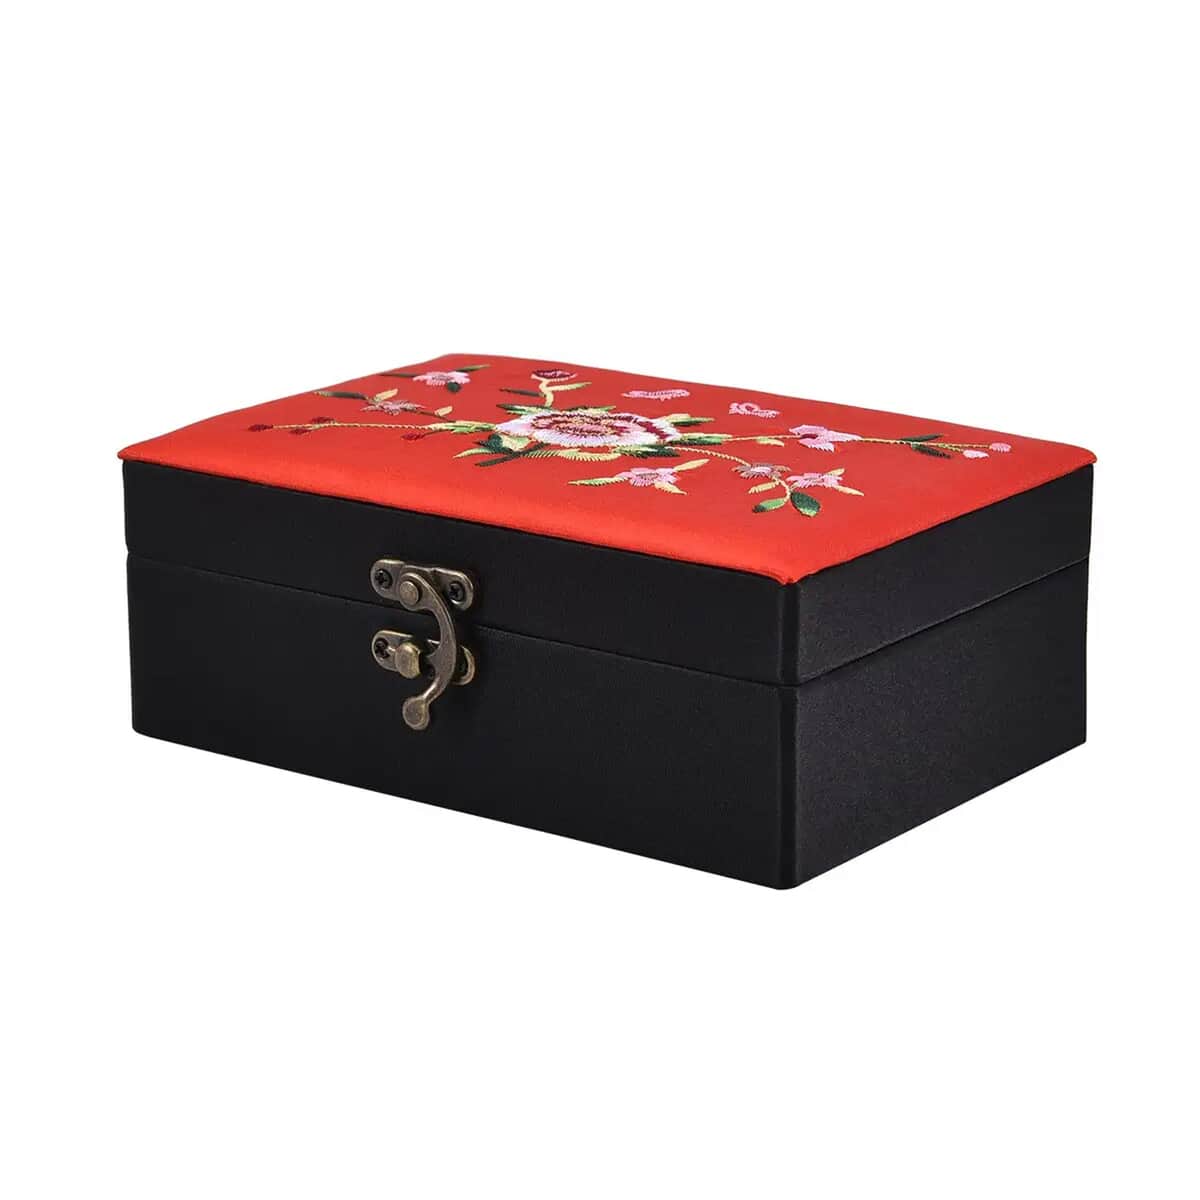 Red Flower Pattern Embroidery Satin Jewelry Box with Embroidery and Lock (6.89"x4.64"x2.56") image number 4